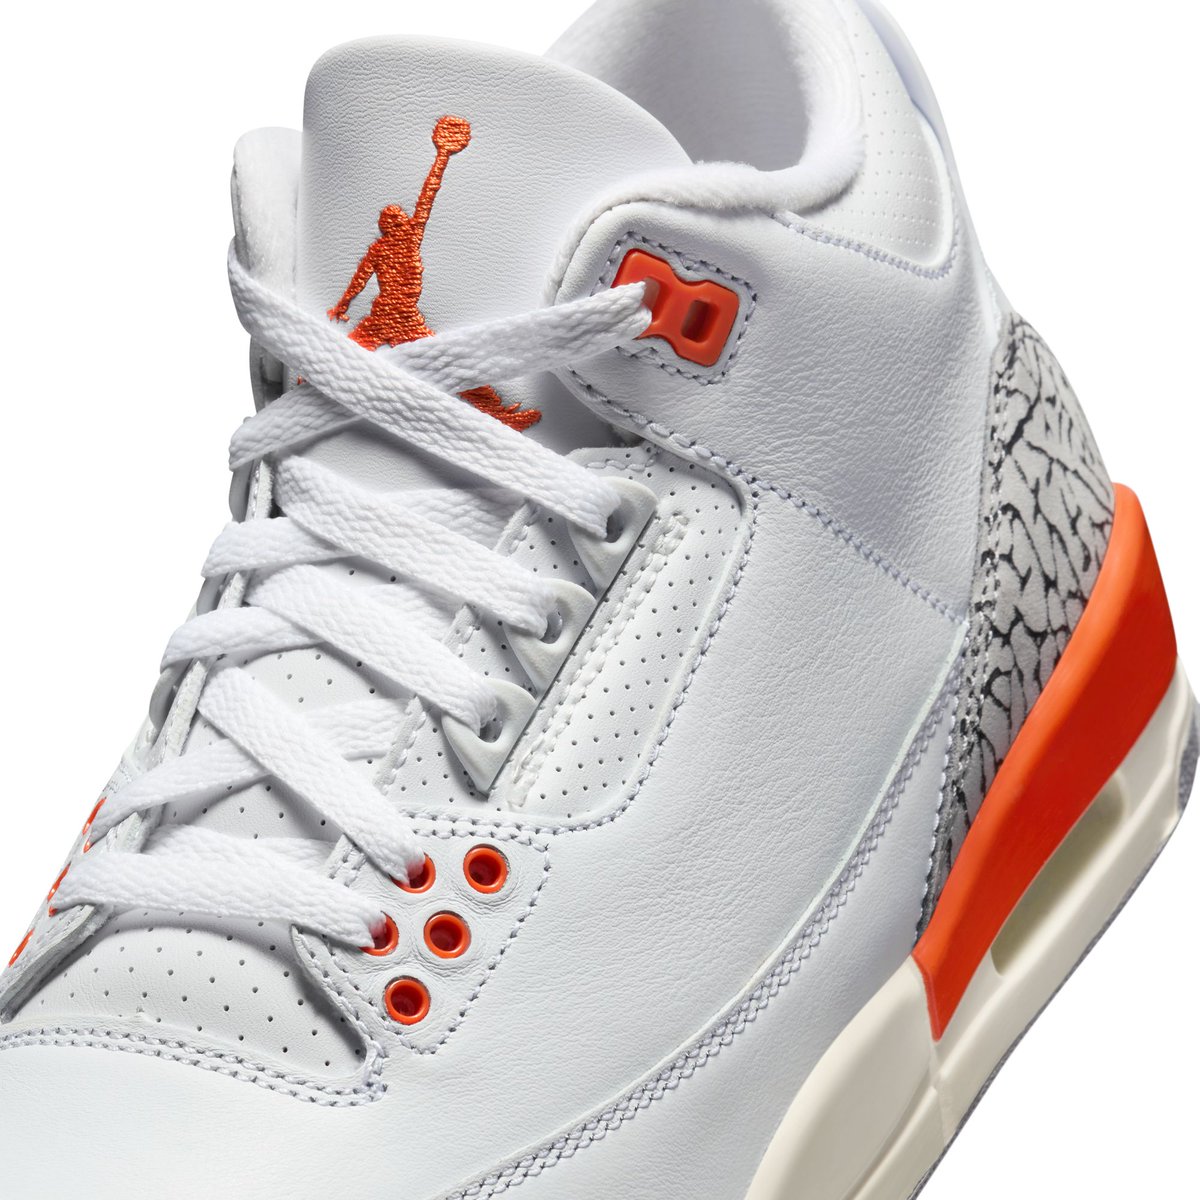 The Women's Air Jordan 3 Retro - 'Georgia Peach' is now available on our online store - soleplayatl.com/products/women…